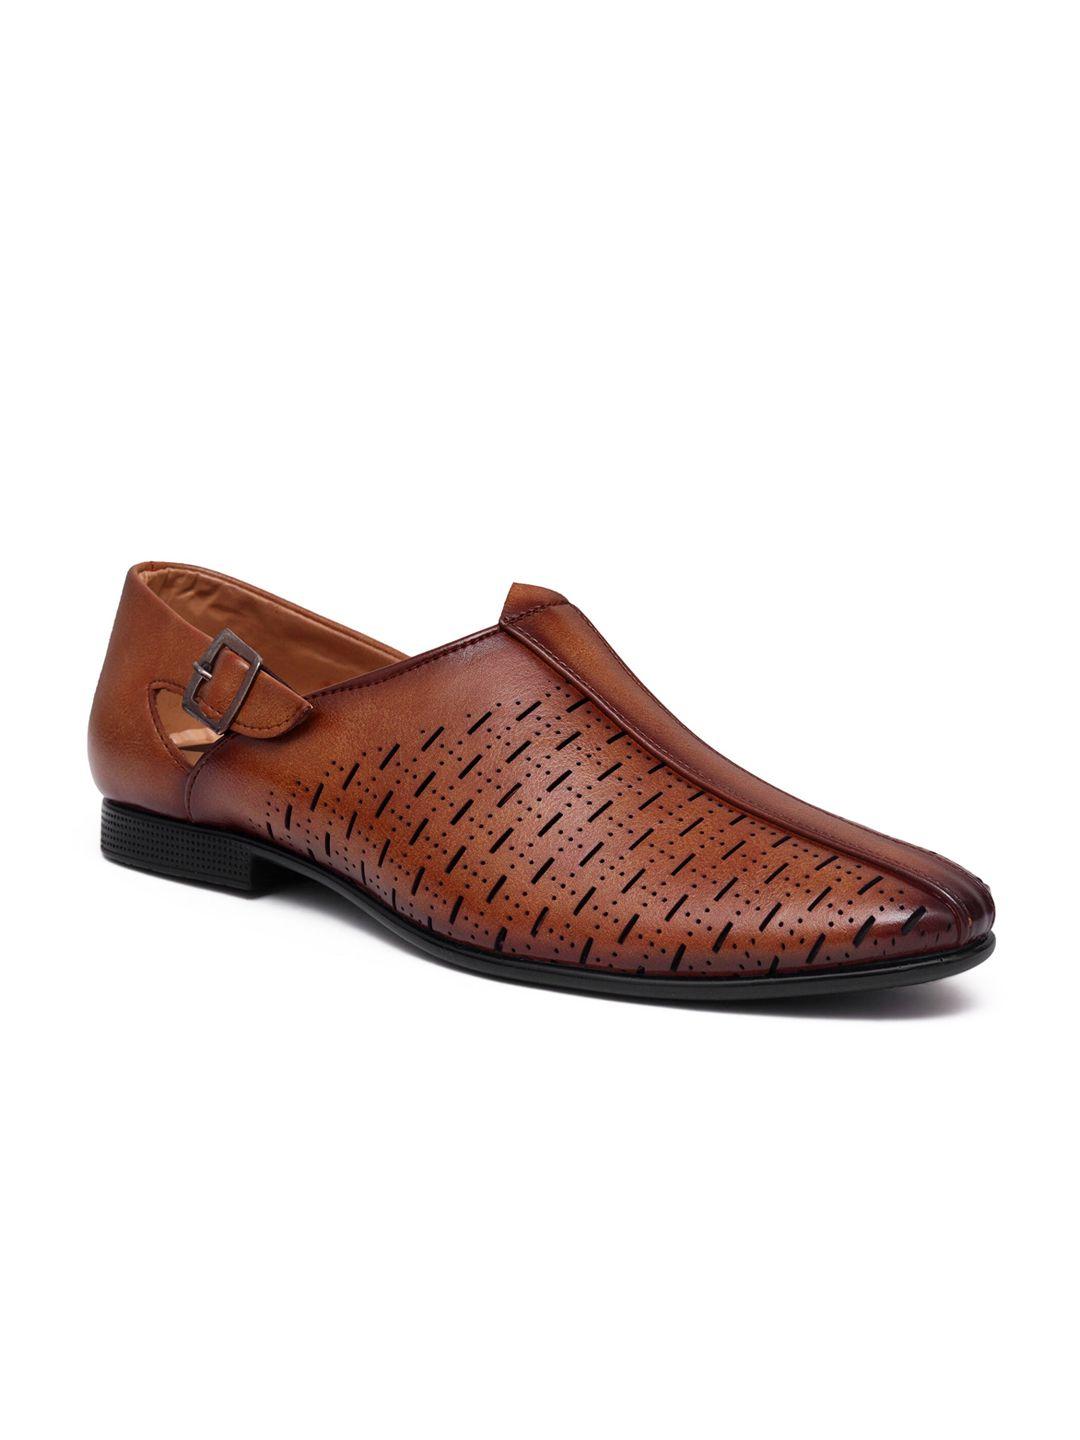 birgos men tan brown textured synthetic leather formal slip-on shoes